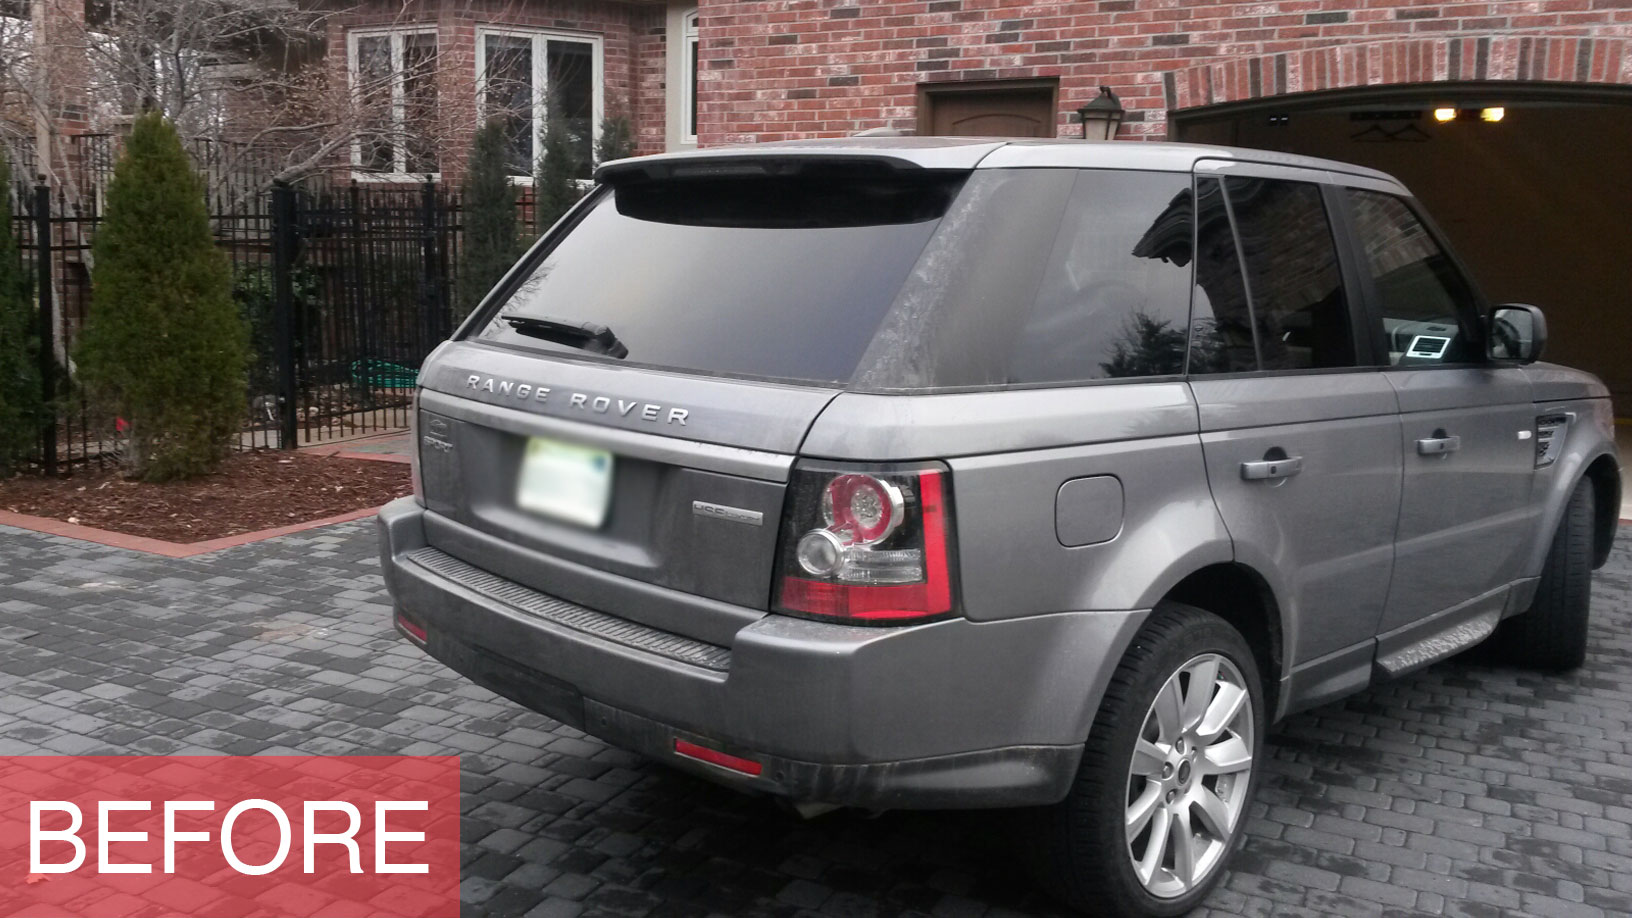 Range Rover SUV before being power washed